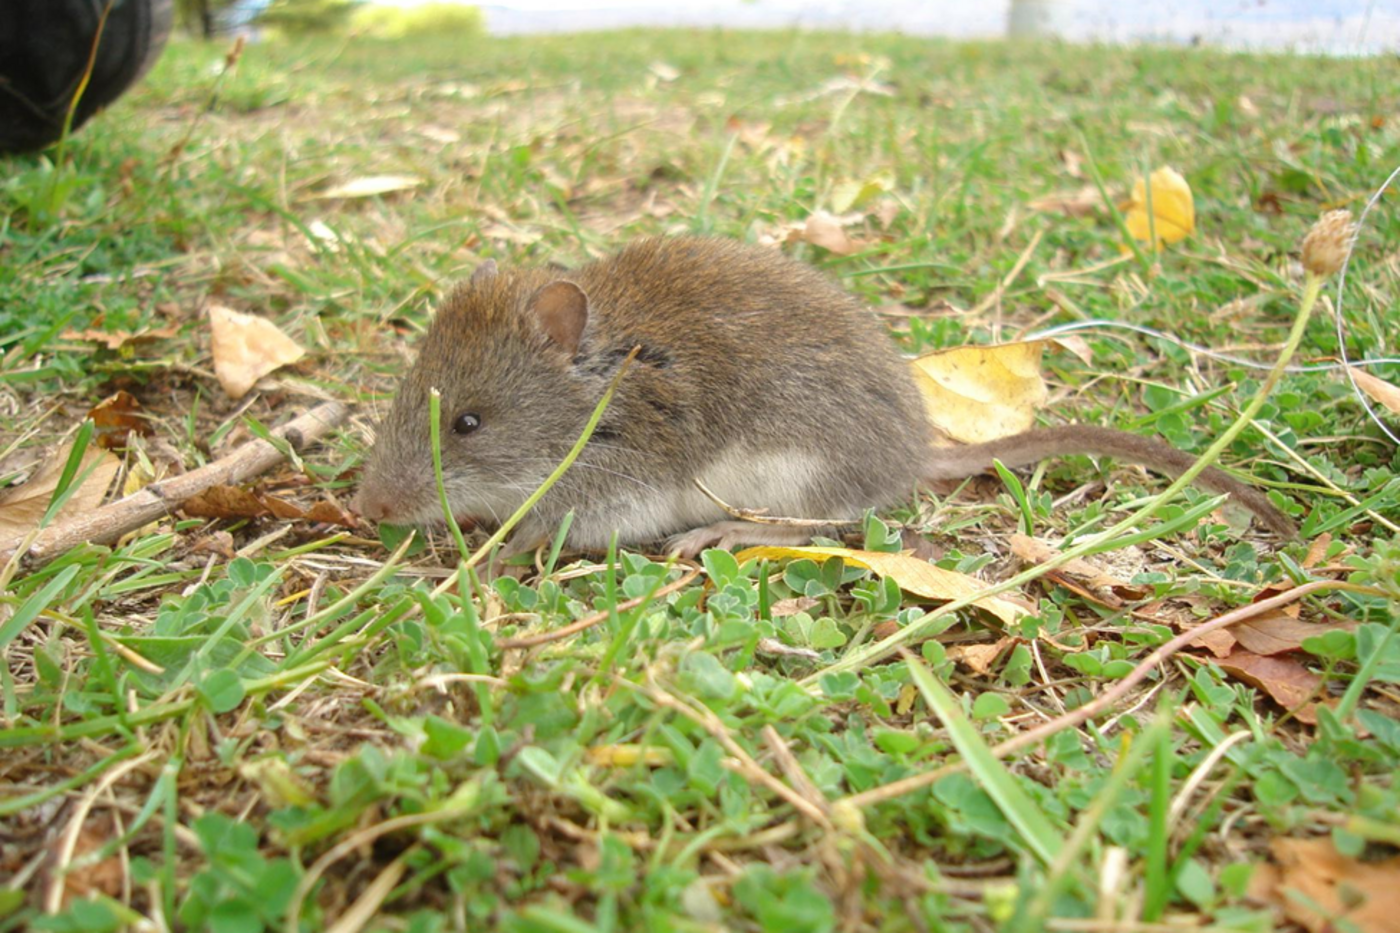 A greyish brown mouse with small black eyes sits on the grass, with sticks and leaves around it.